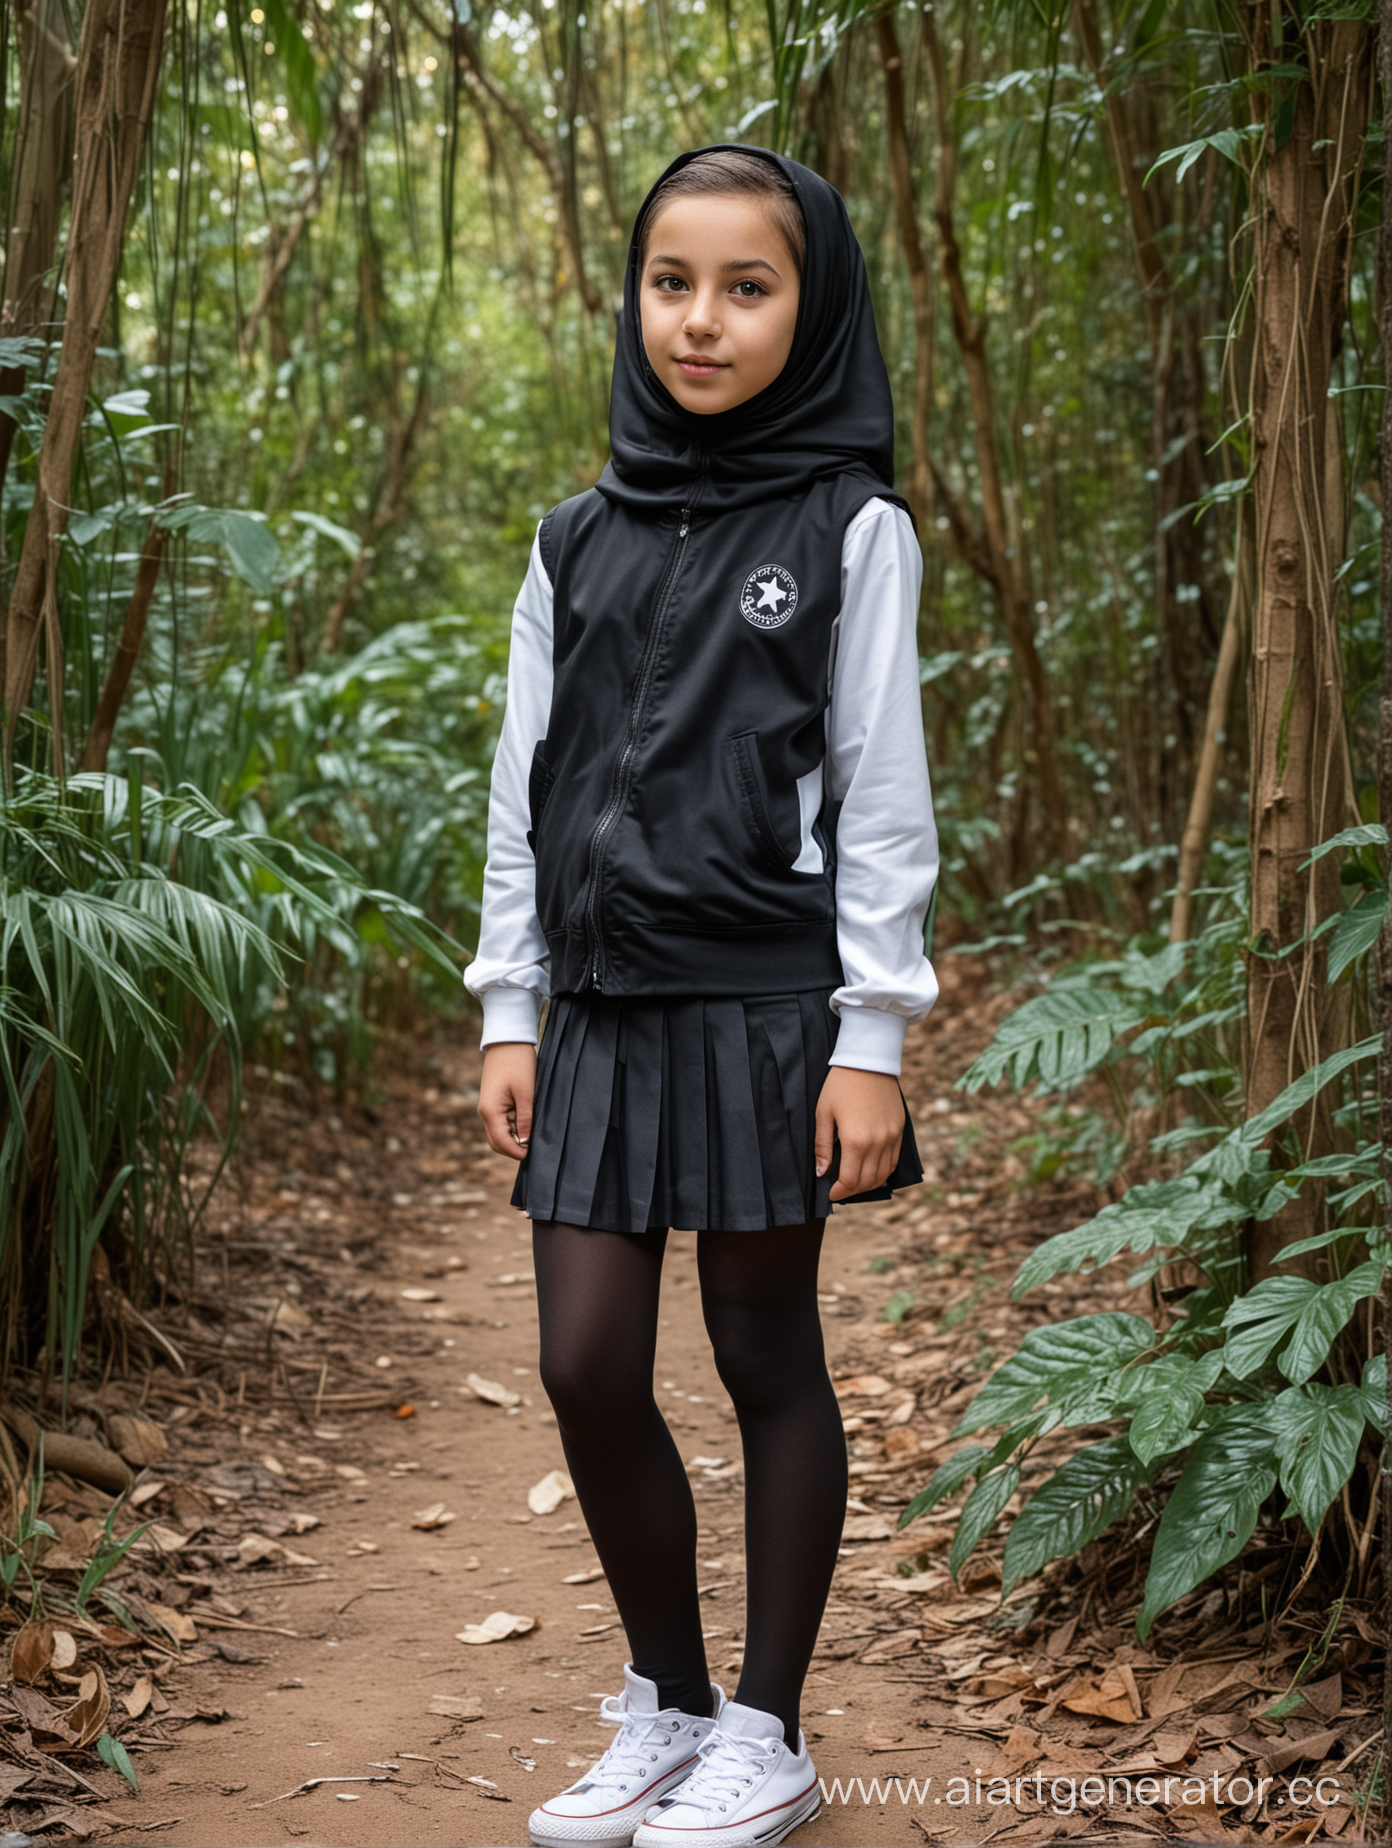 A little girl, 12 years old, turkey style hijab, school skirt, white converse shoes, school uniform, black opaque tights, standing in the jungle, from side, top view, turkish, hairless, petite body, hooded jacket, sexy pose